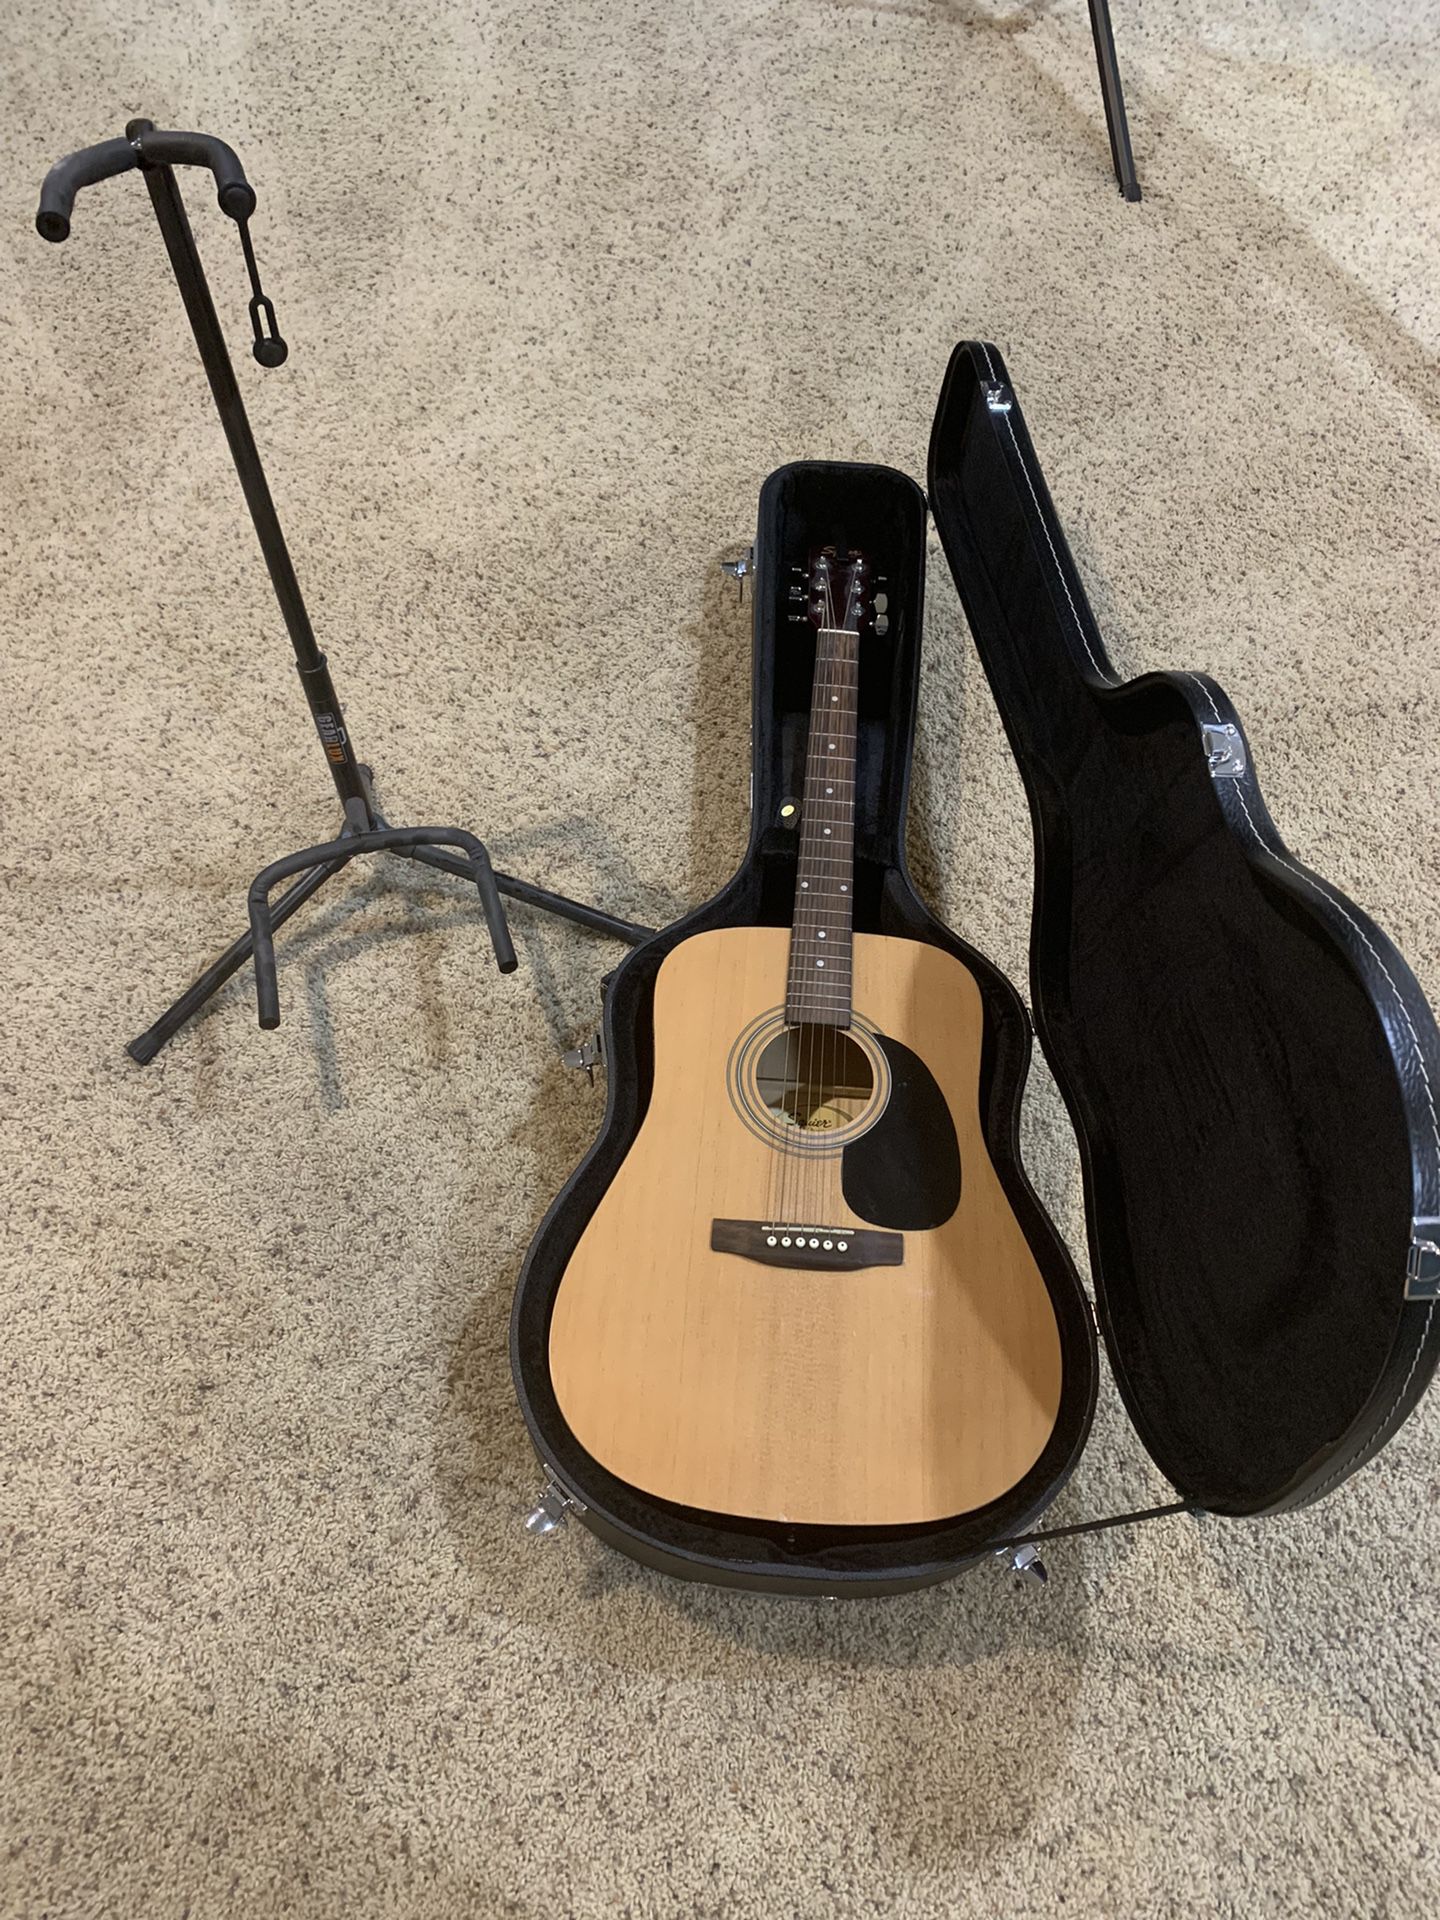 Fender Squier Acoustic Guitar w/ Case and Stand